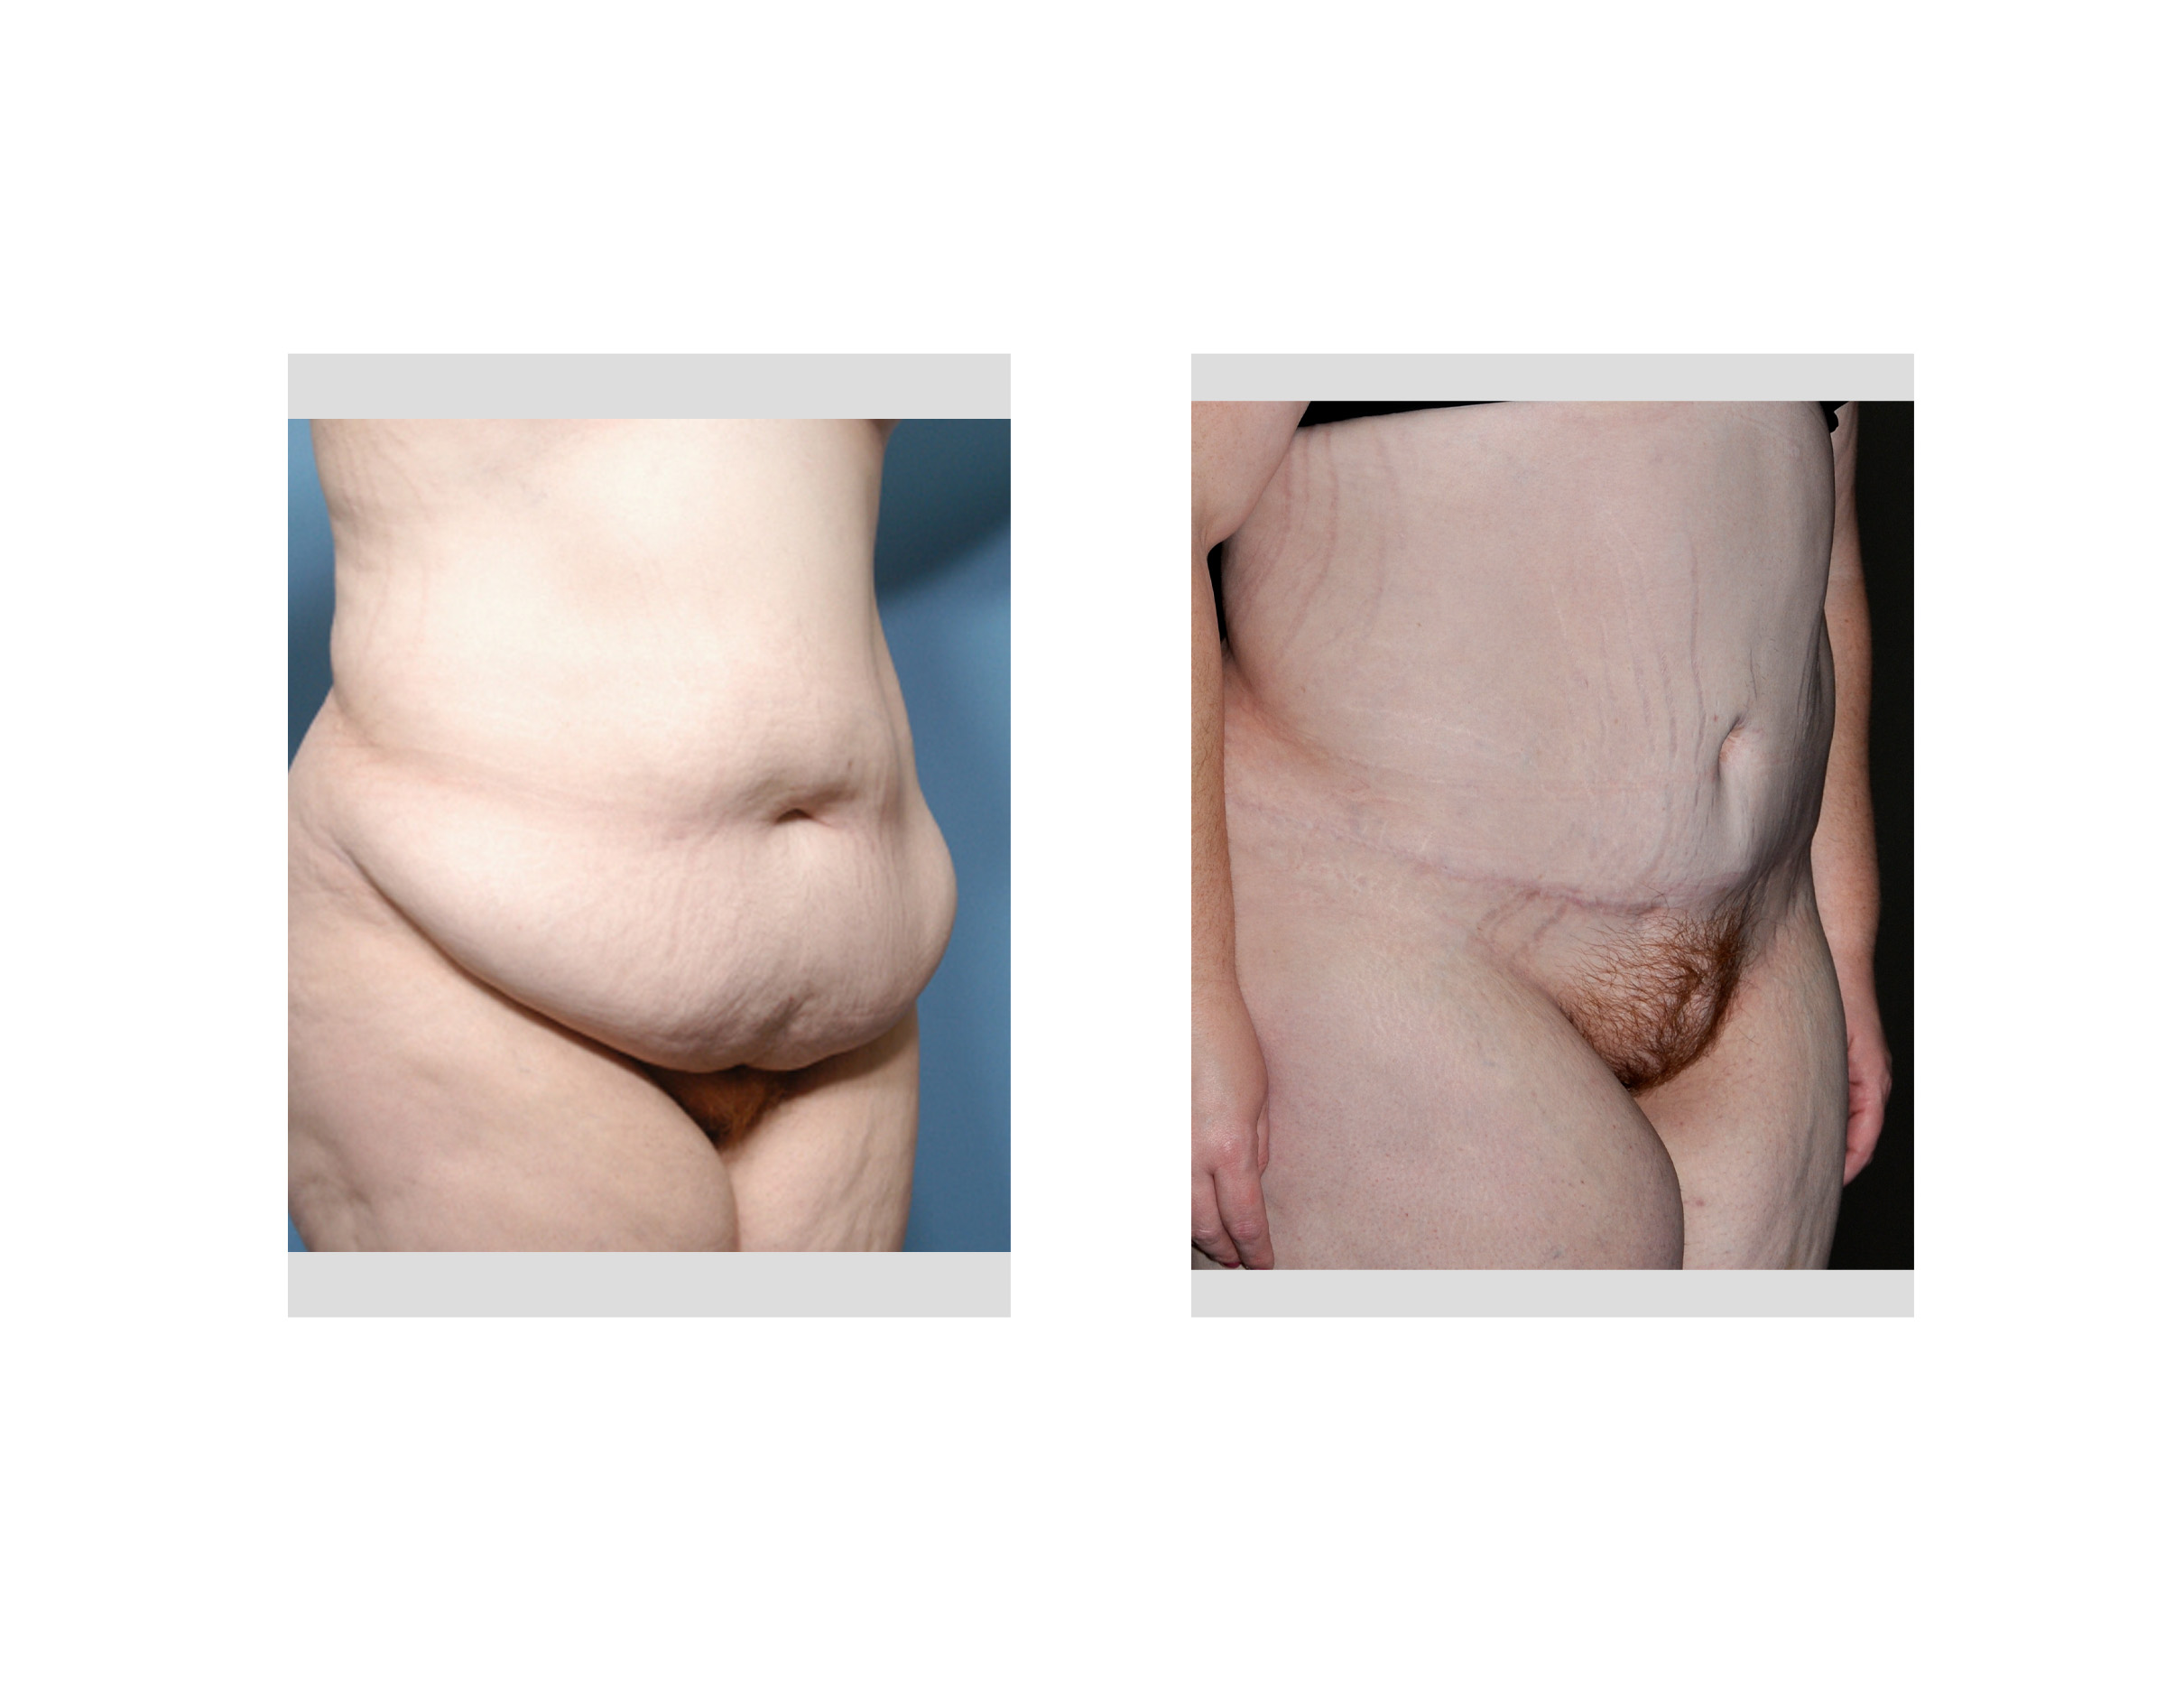 Enlarged & rounded mons pubis 2 years after tummy tuck? (Photo)